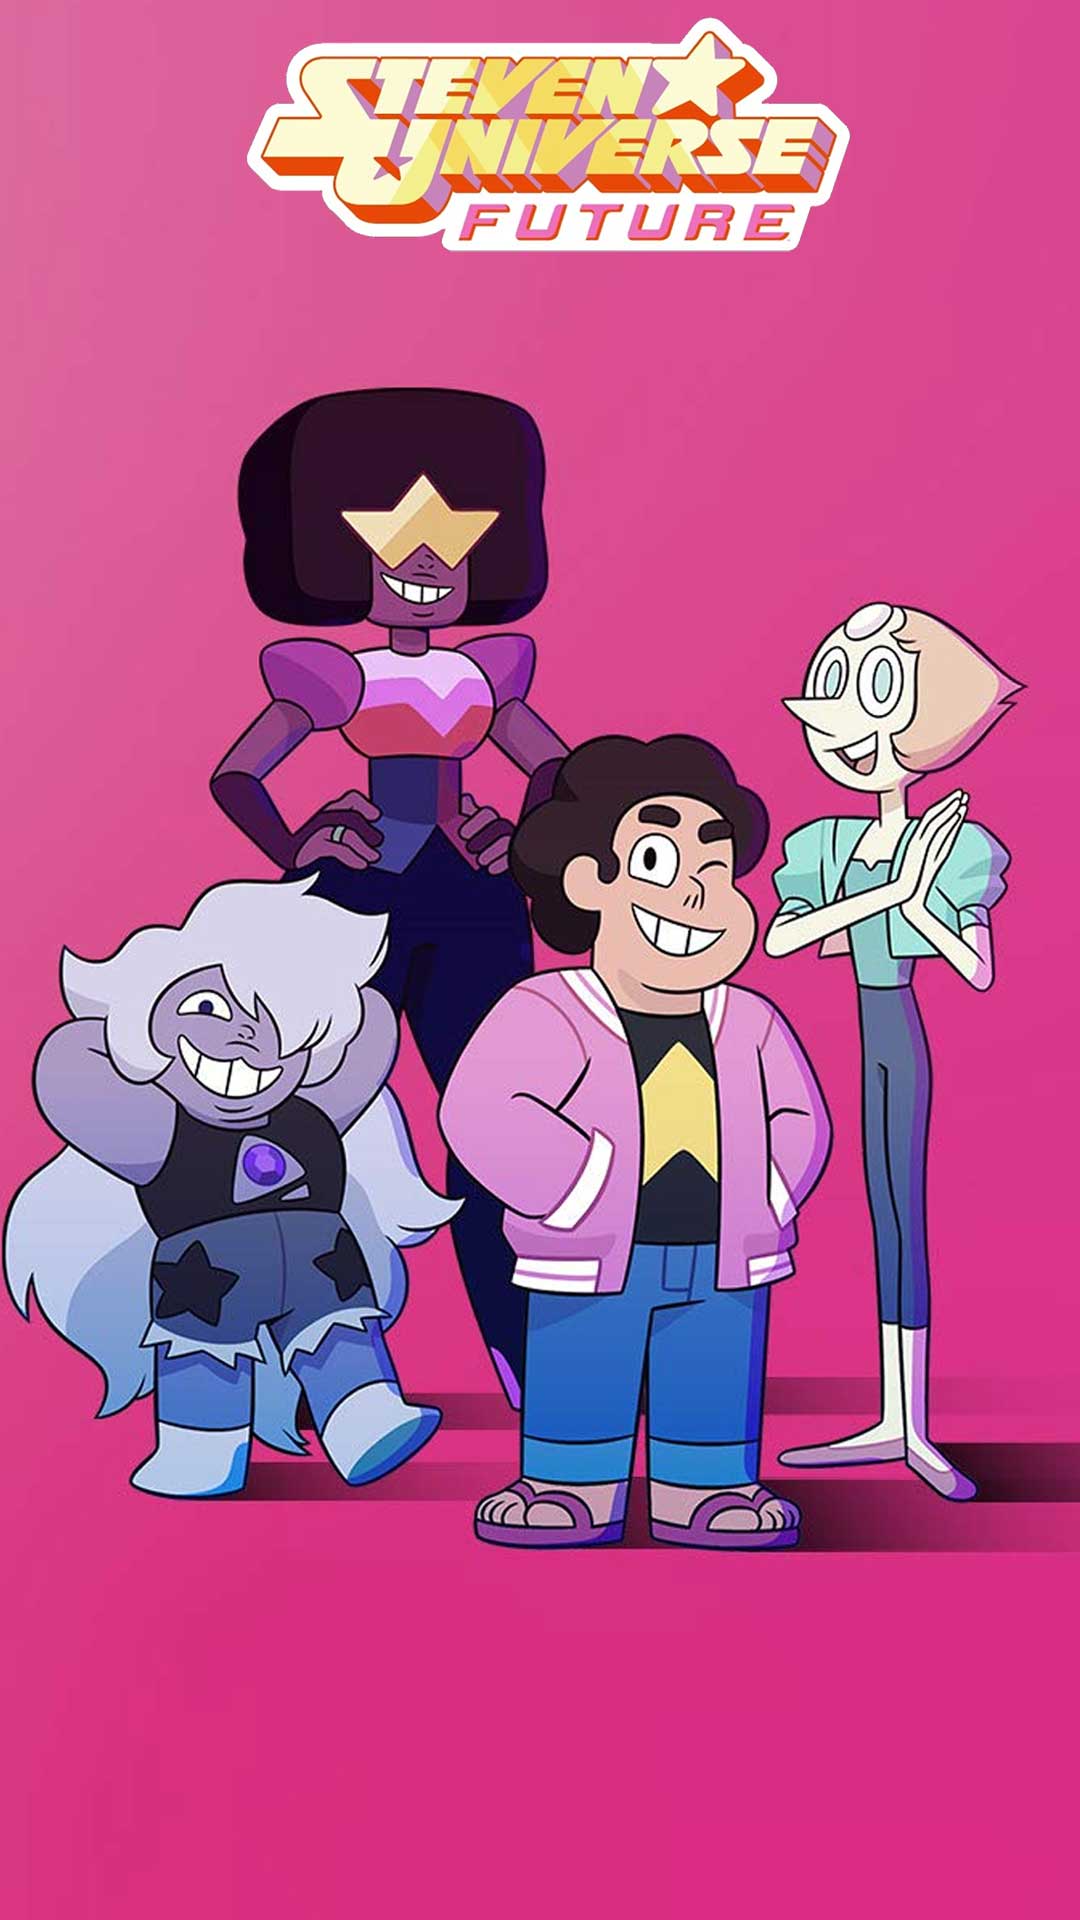 Steven Universe Future wallpaper phone background for free download